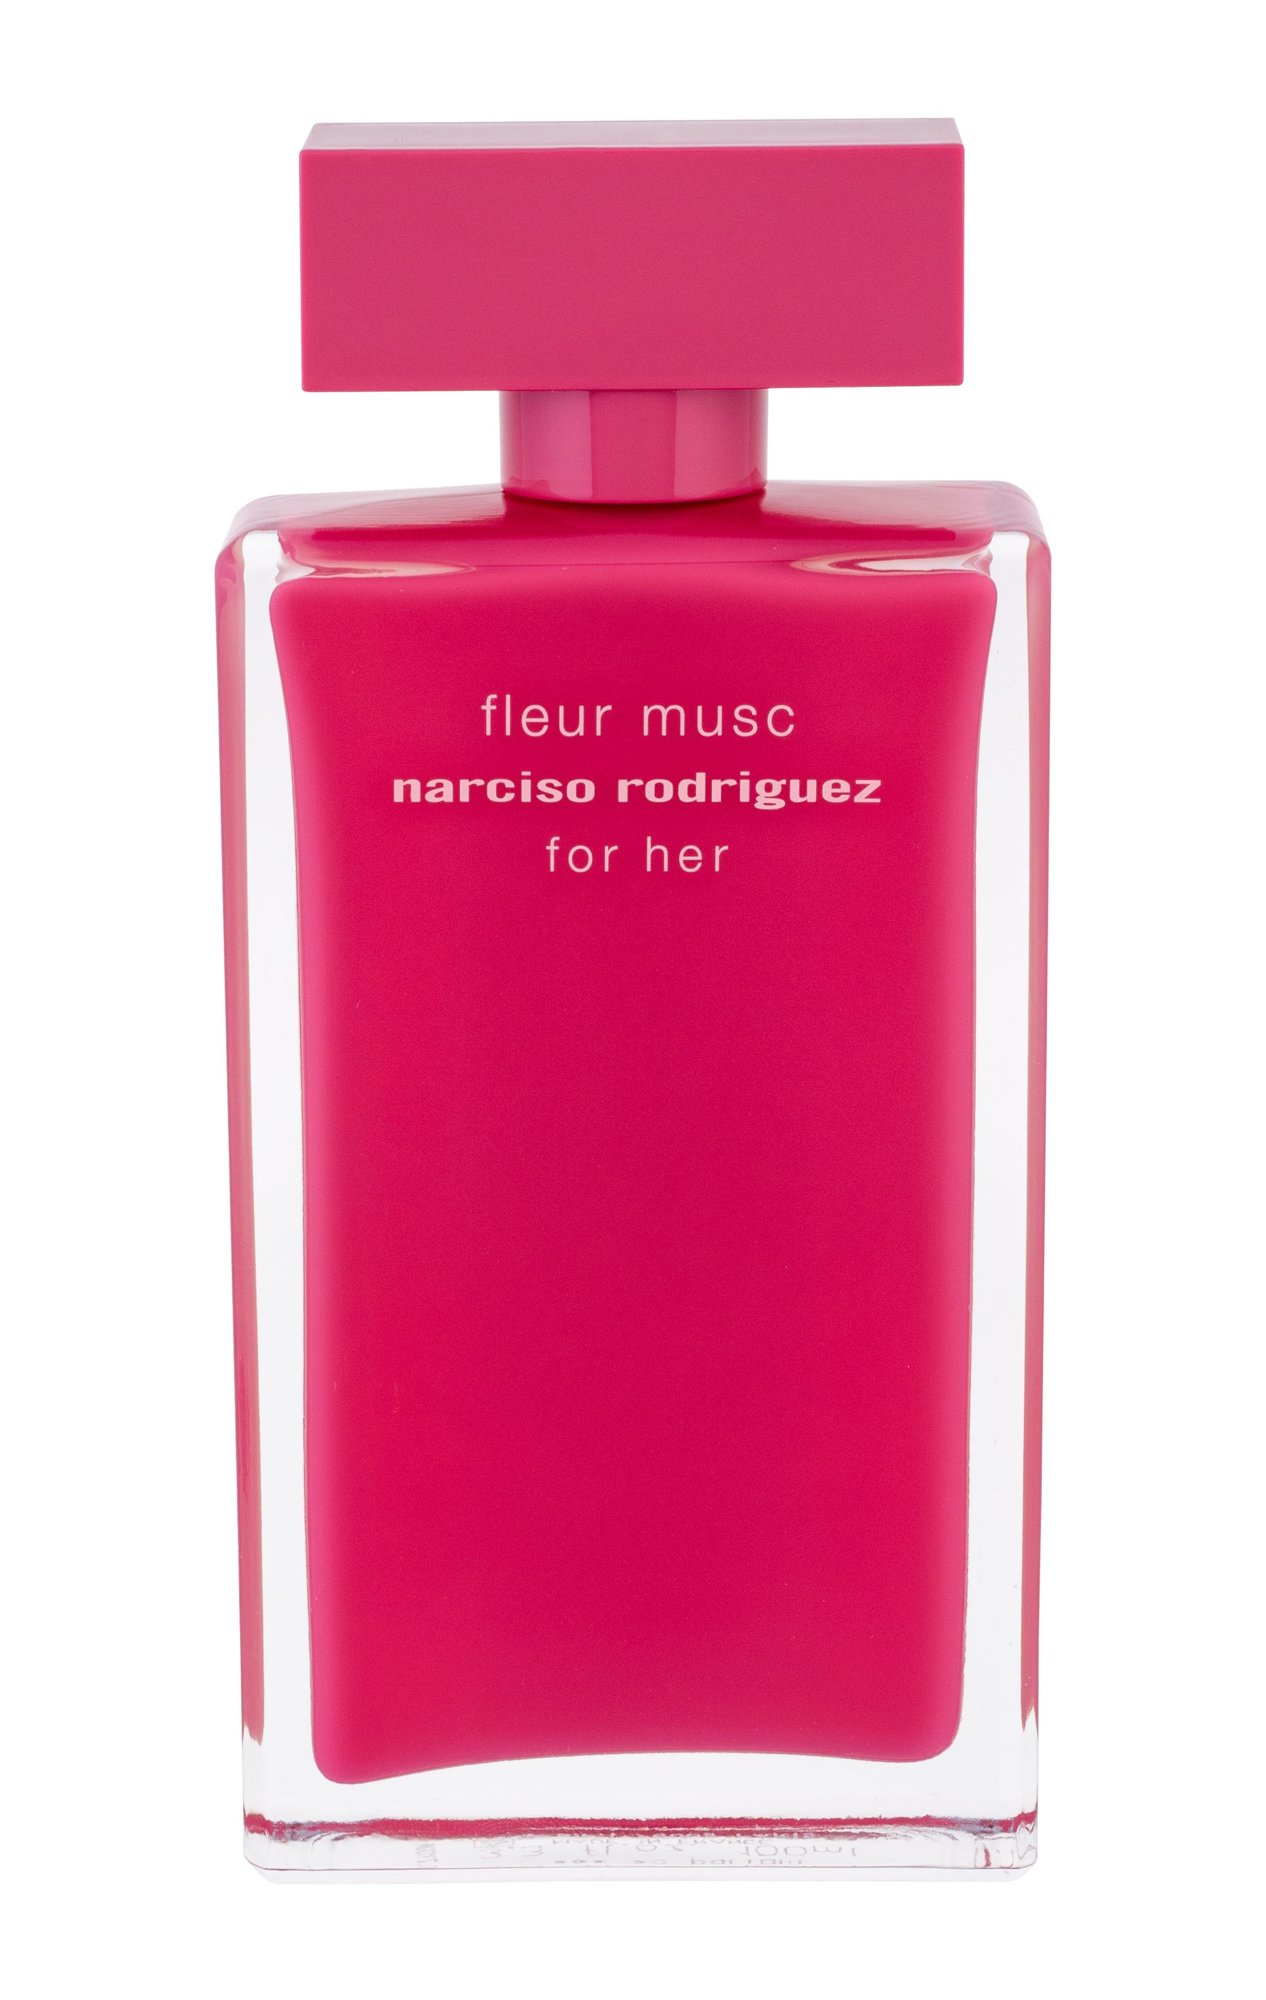 Narciso Rodriguez Fleur Musc for Her, EDP 100ml